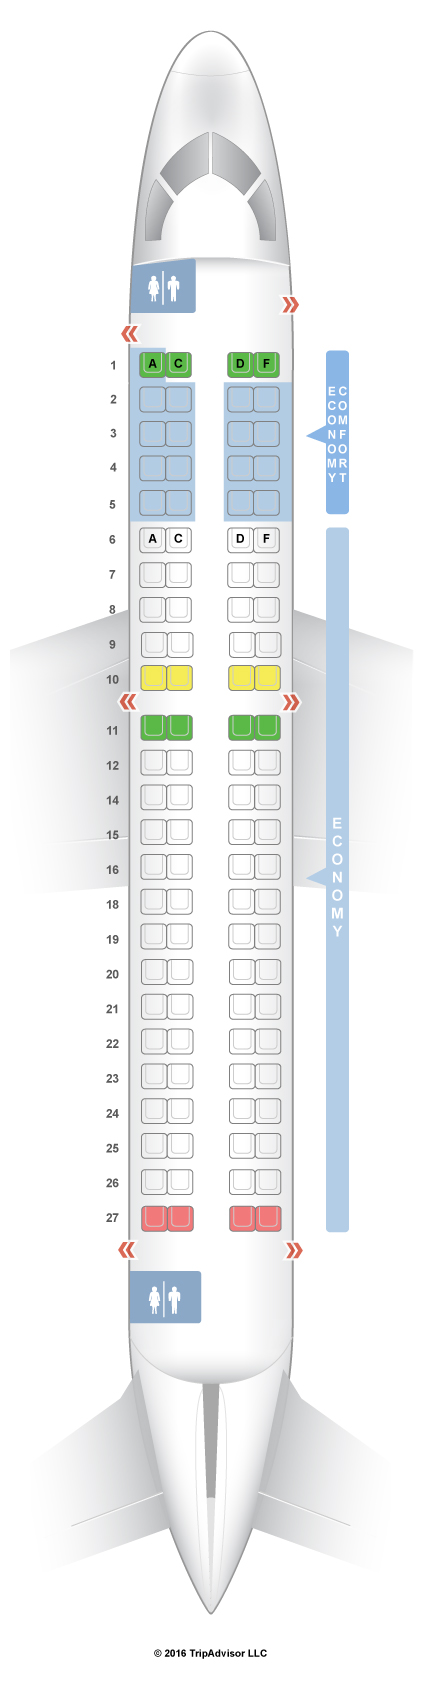 Embraer Emb E90 Jet Seating Chart